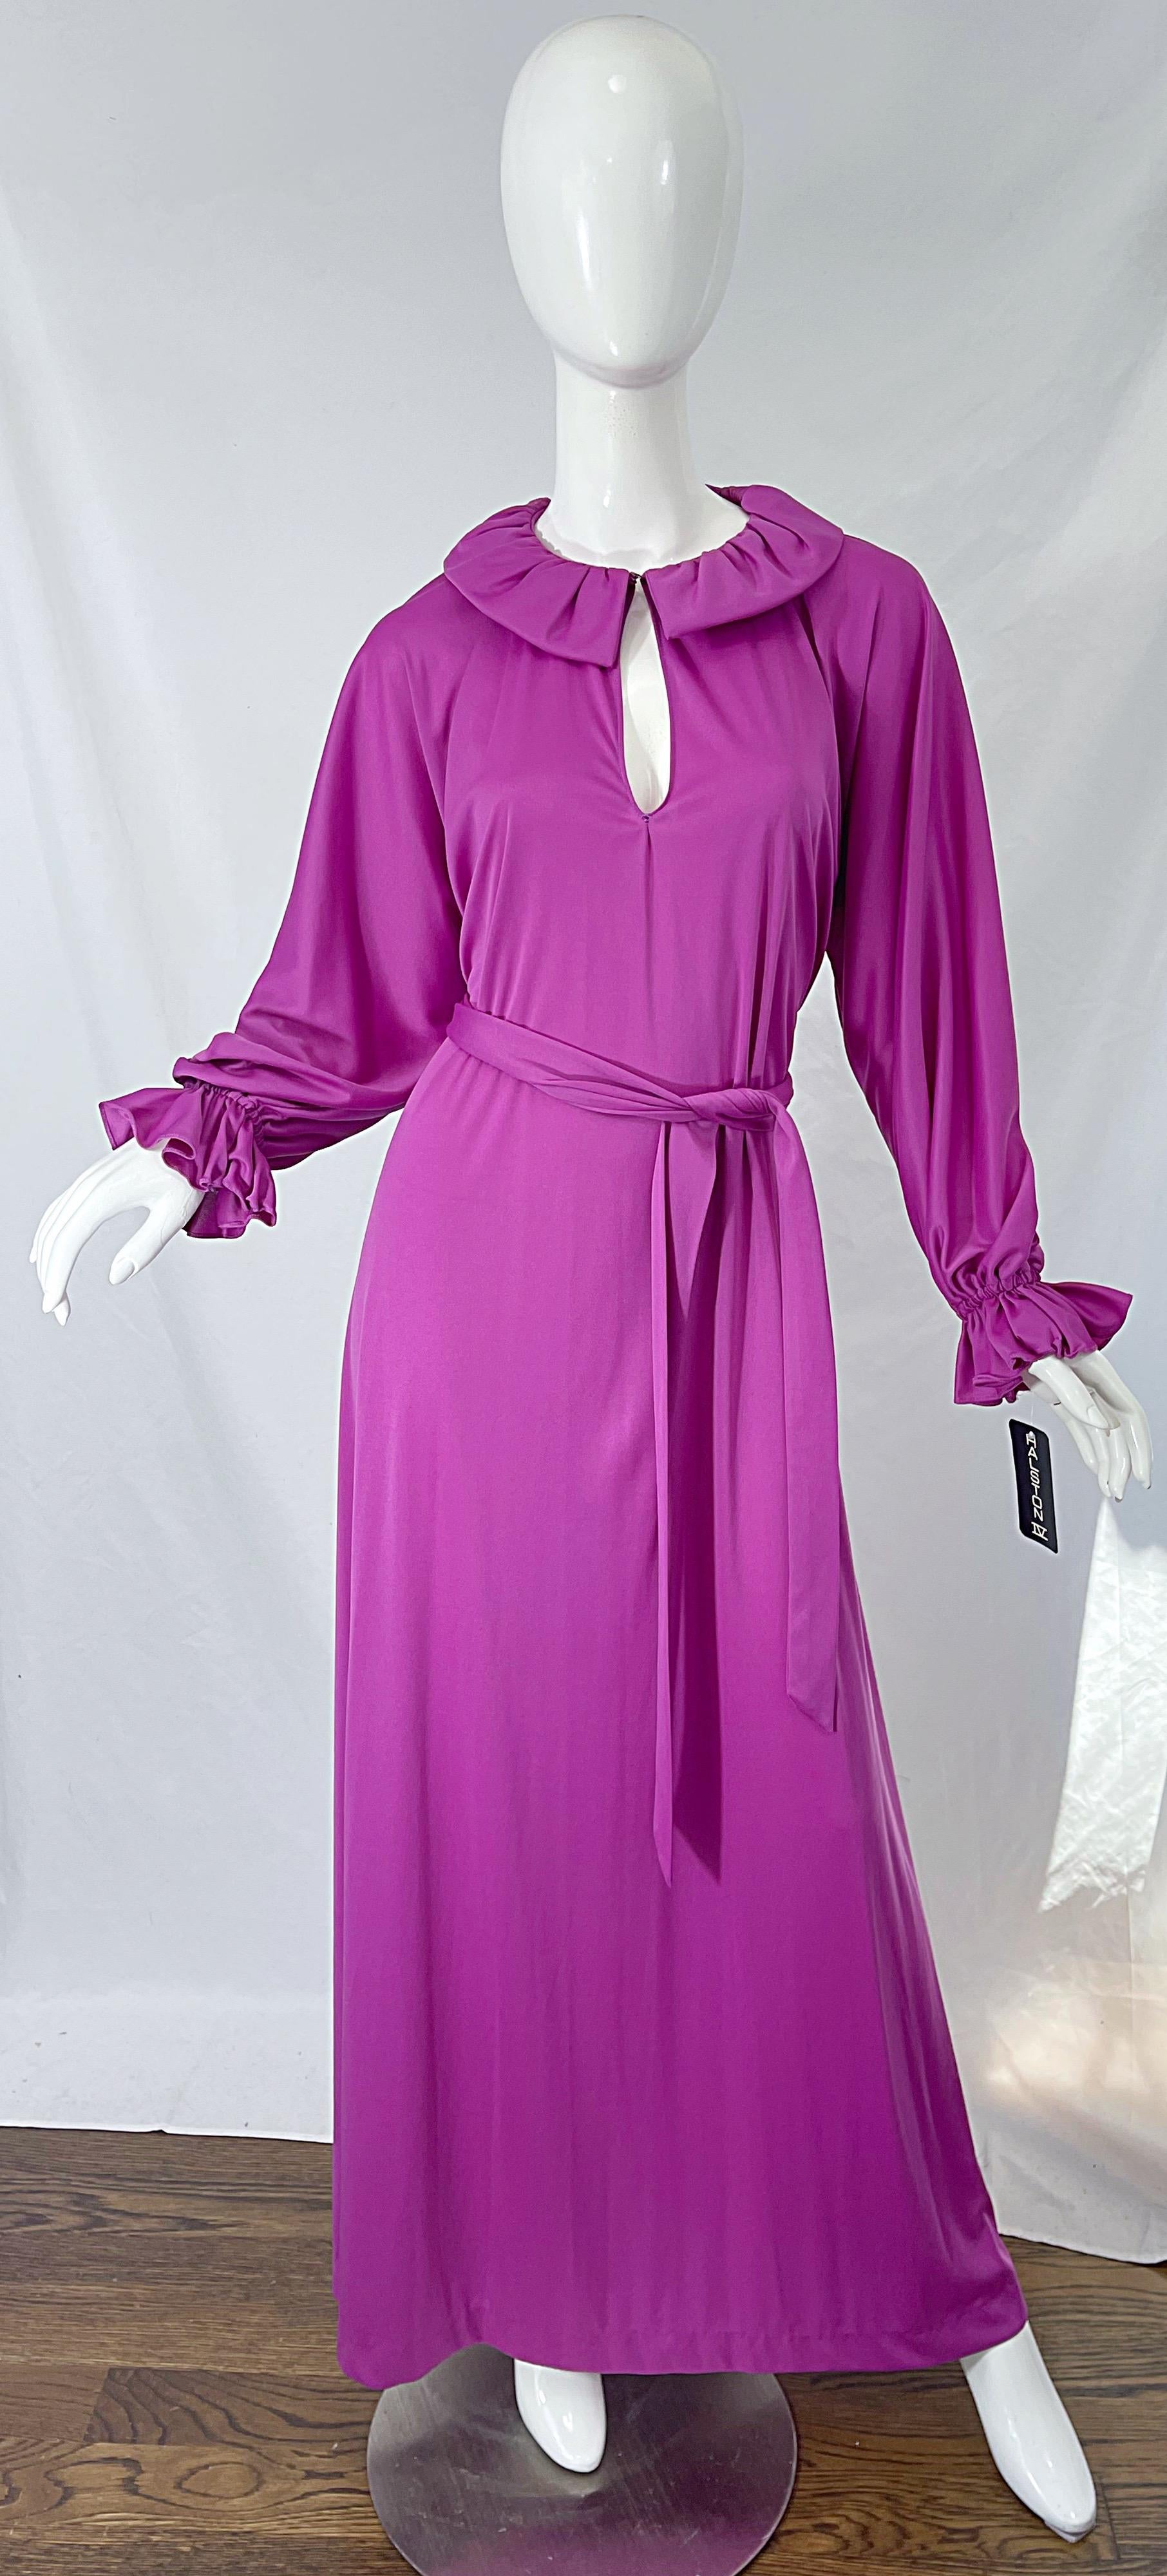 NWT 1970s Halston IV Purple / Pink One Size Fits All Vintage 70s Maxi Dress For Sale 12